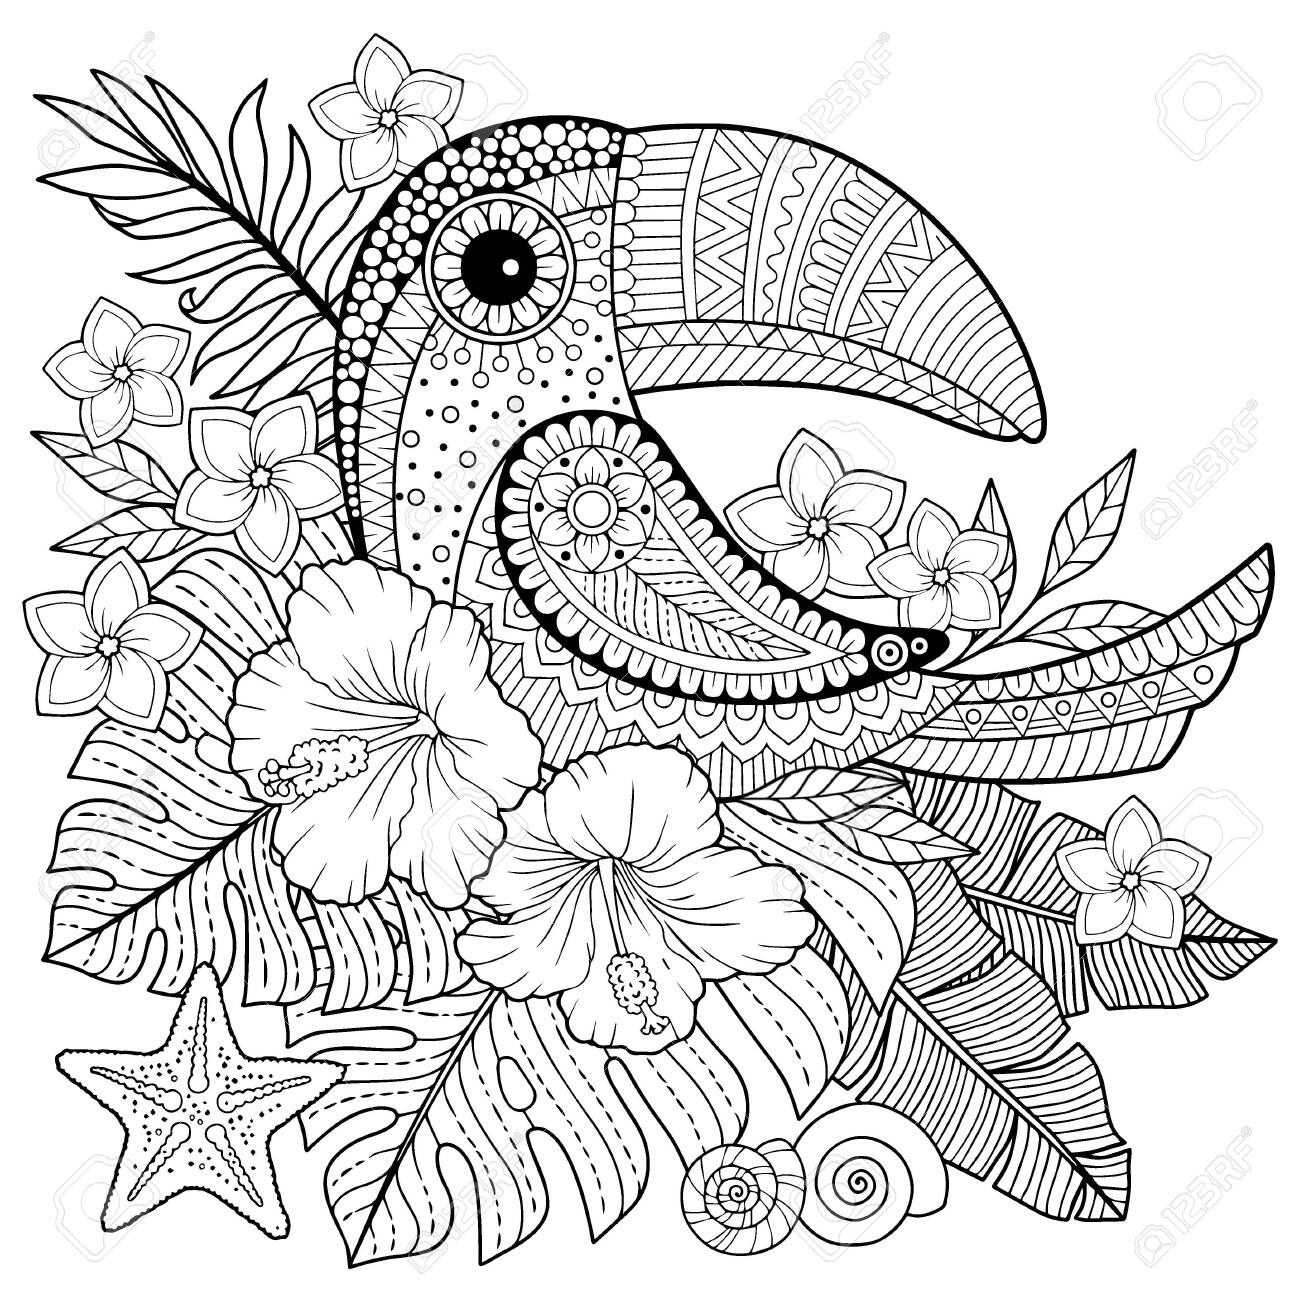 Coloring book for adults toucan among tropical leaves and flowers coloring page for relax and relif royalty free svg cliparts vectors and stock illustration image